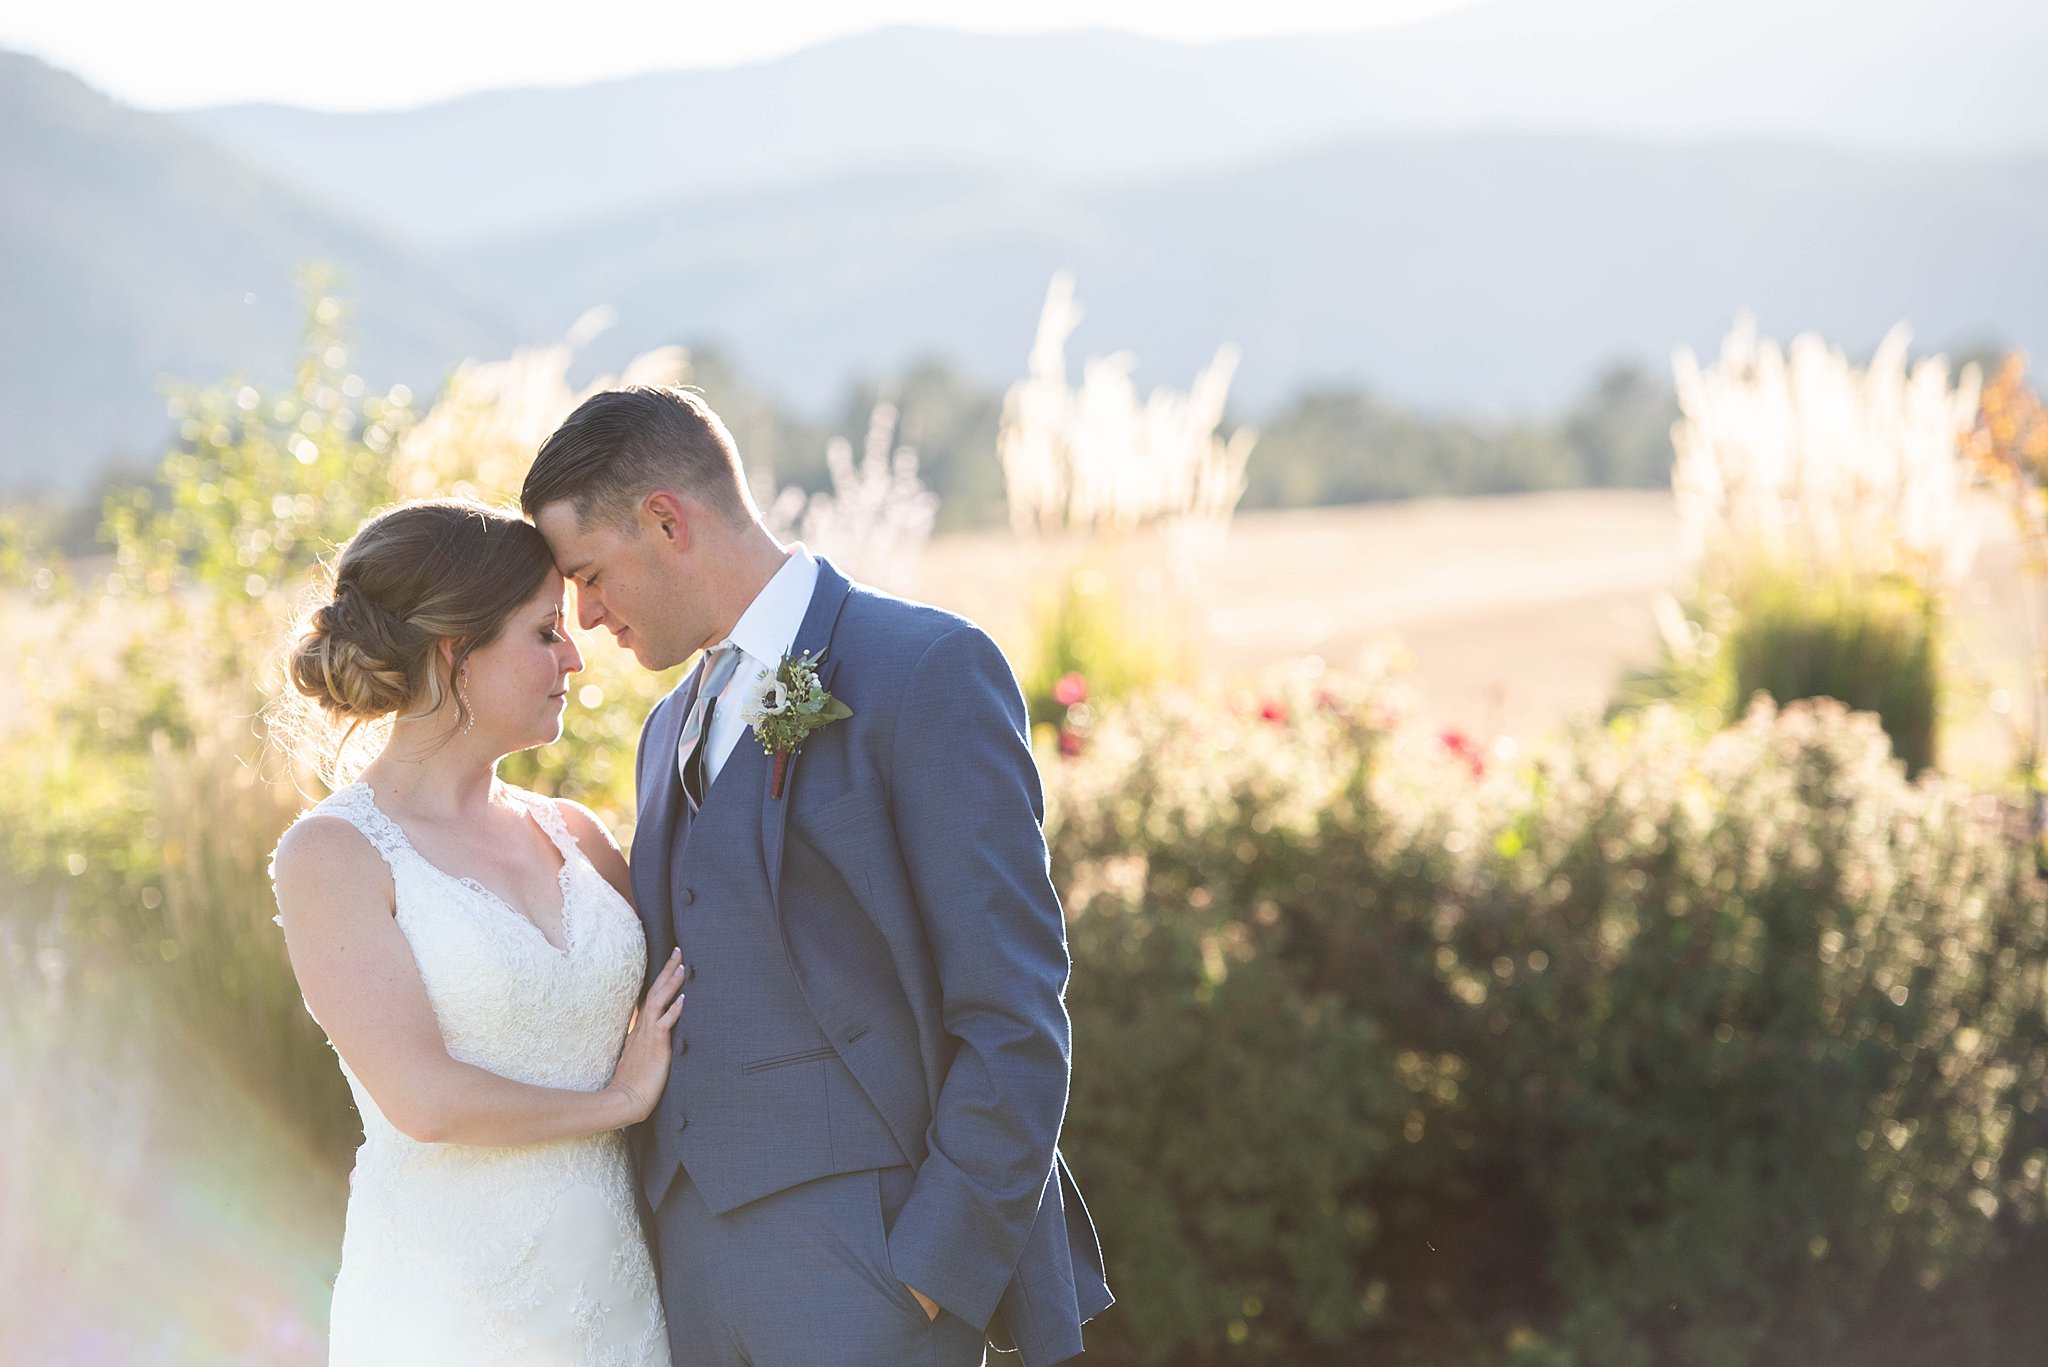 Newlyweds touch foreheads sharing an intimate moment in a garden at a Wine and Nosh wedding